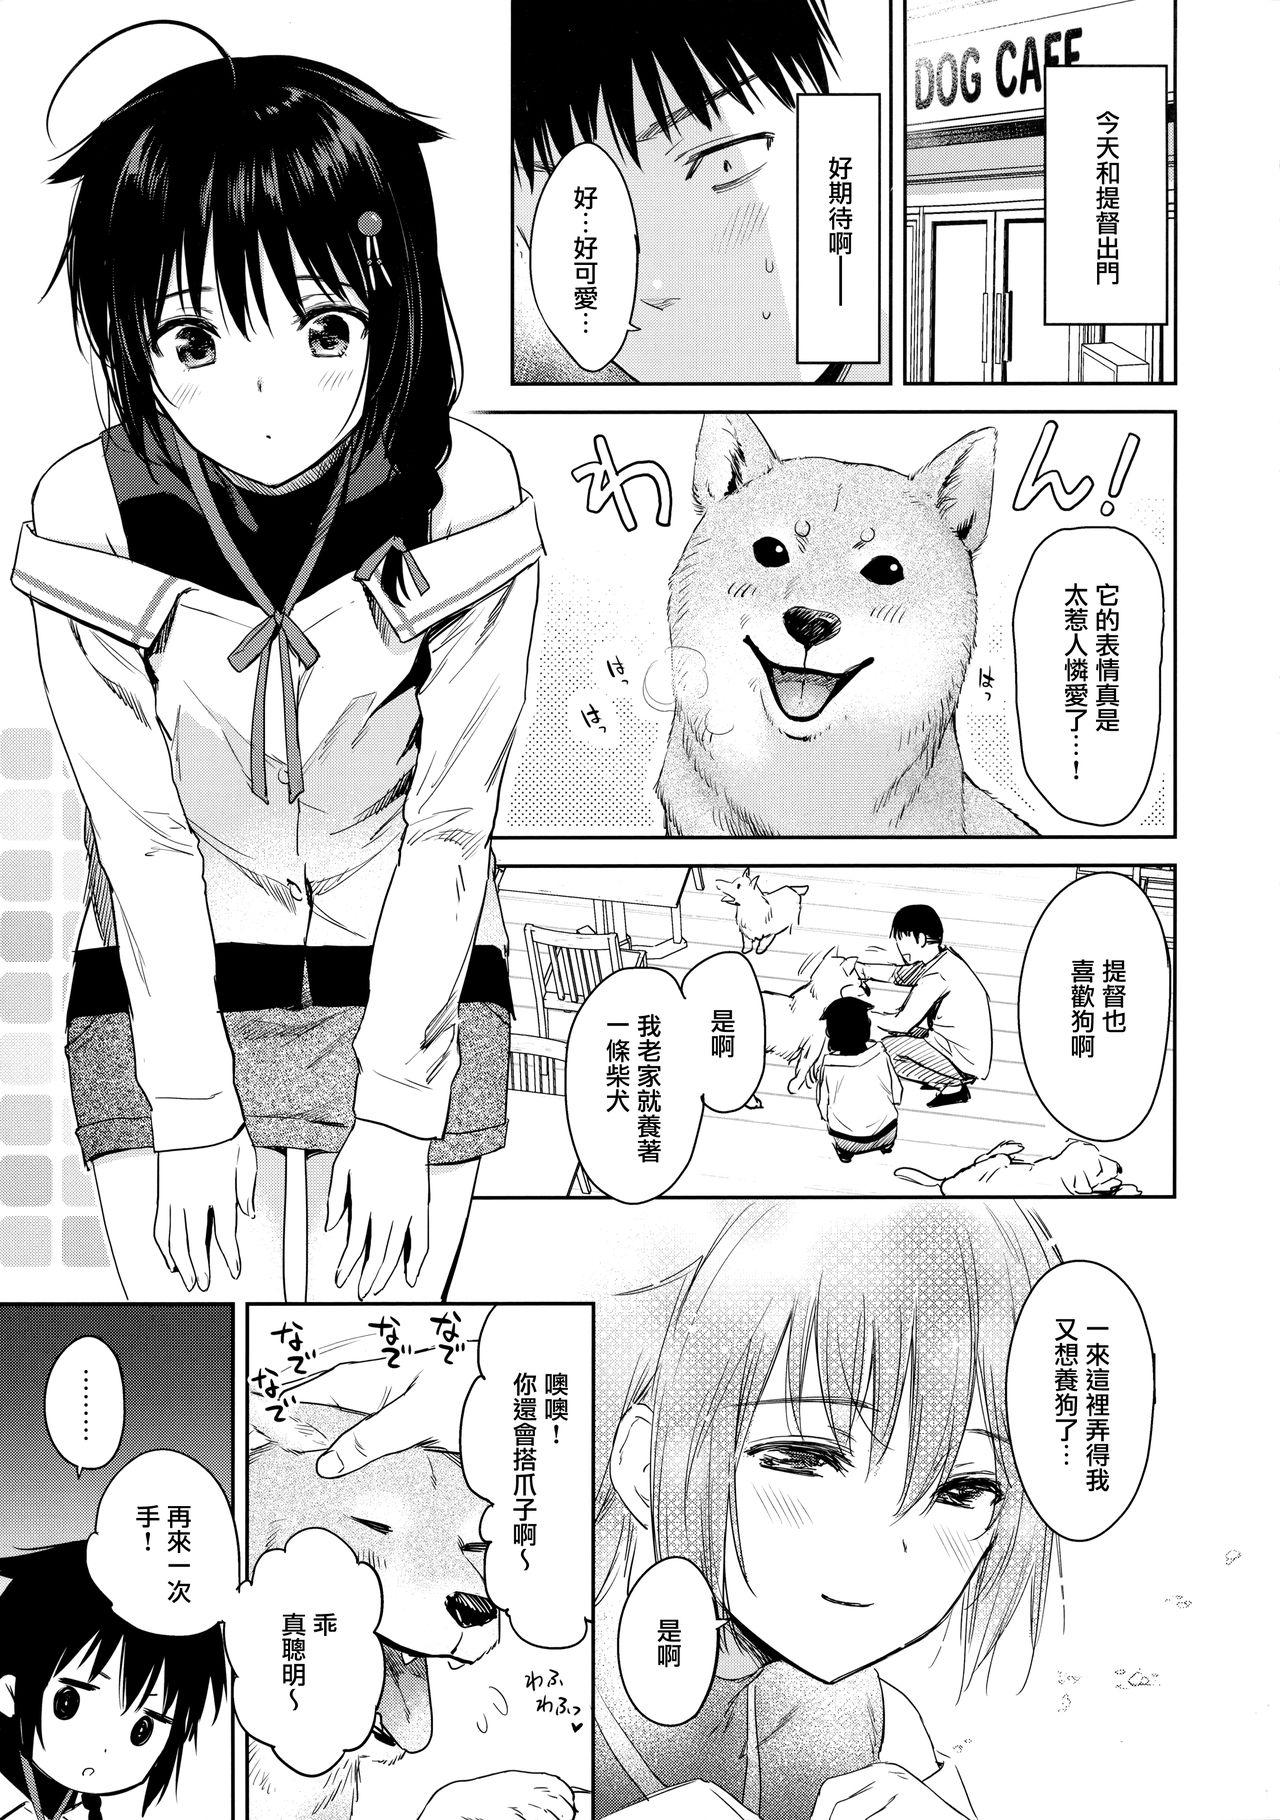 Transsexual Shigure honey dog - Kantai collection Matures - Page 3